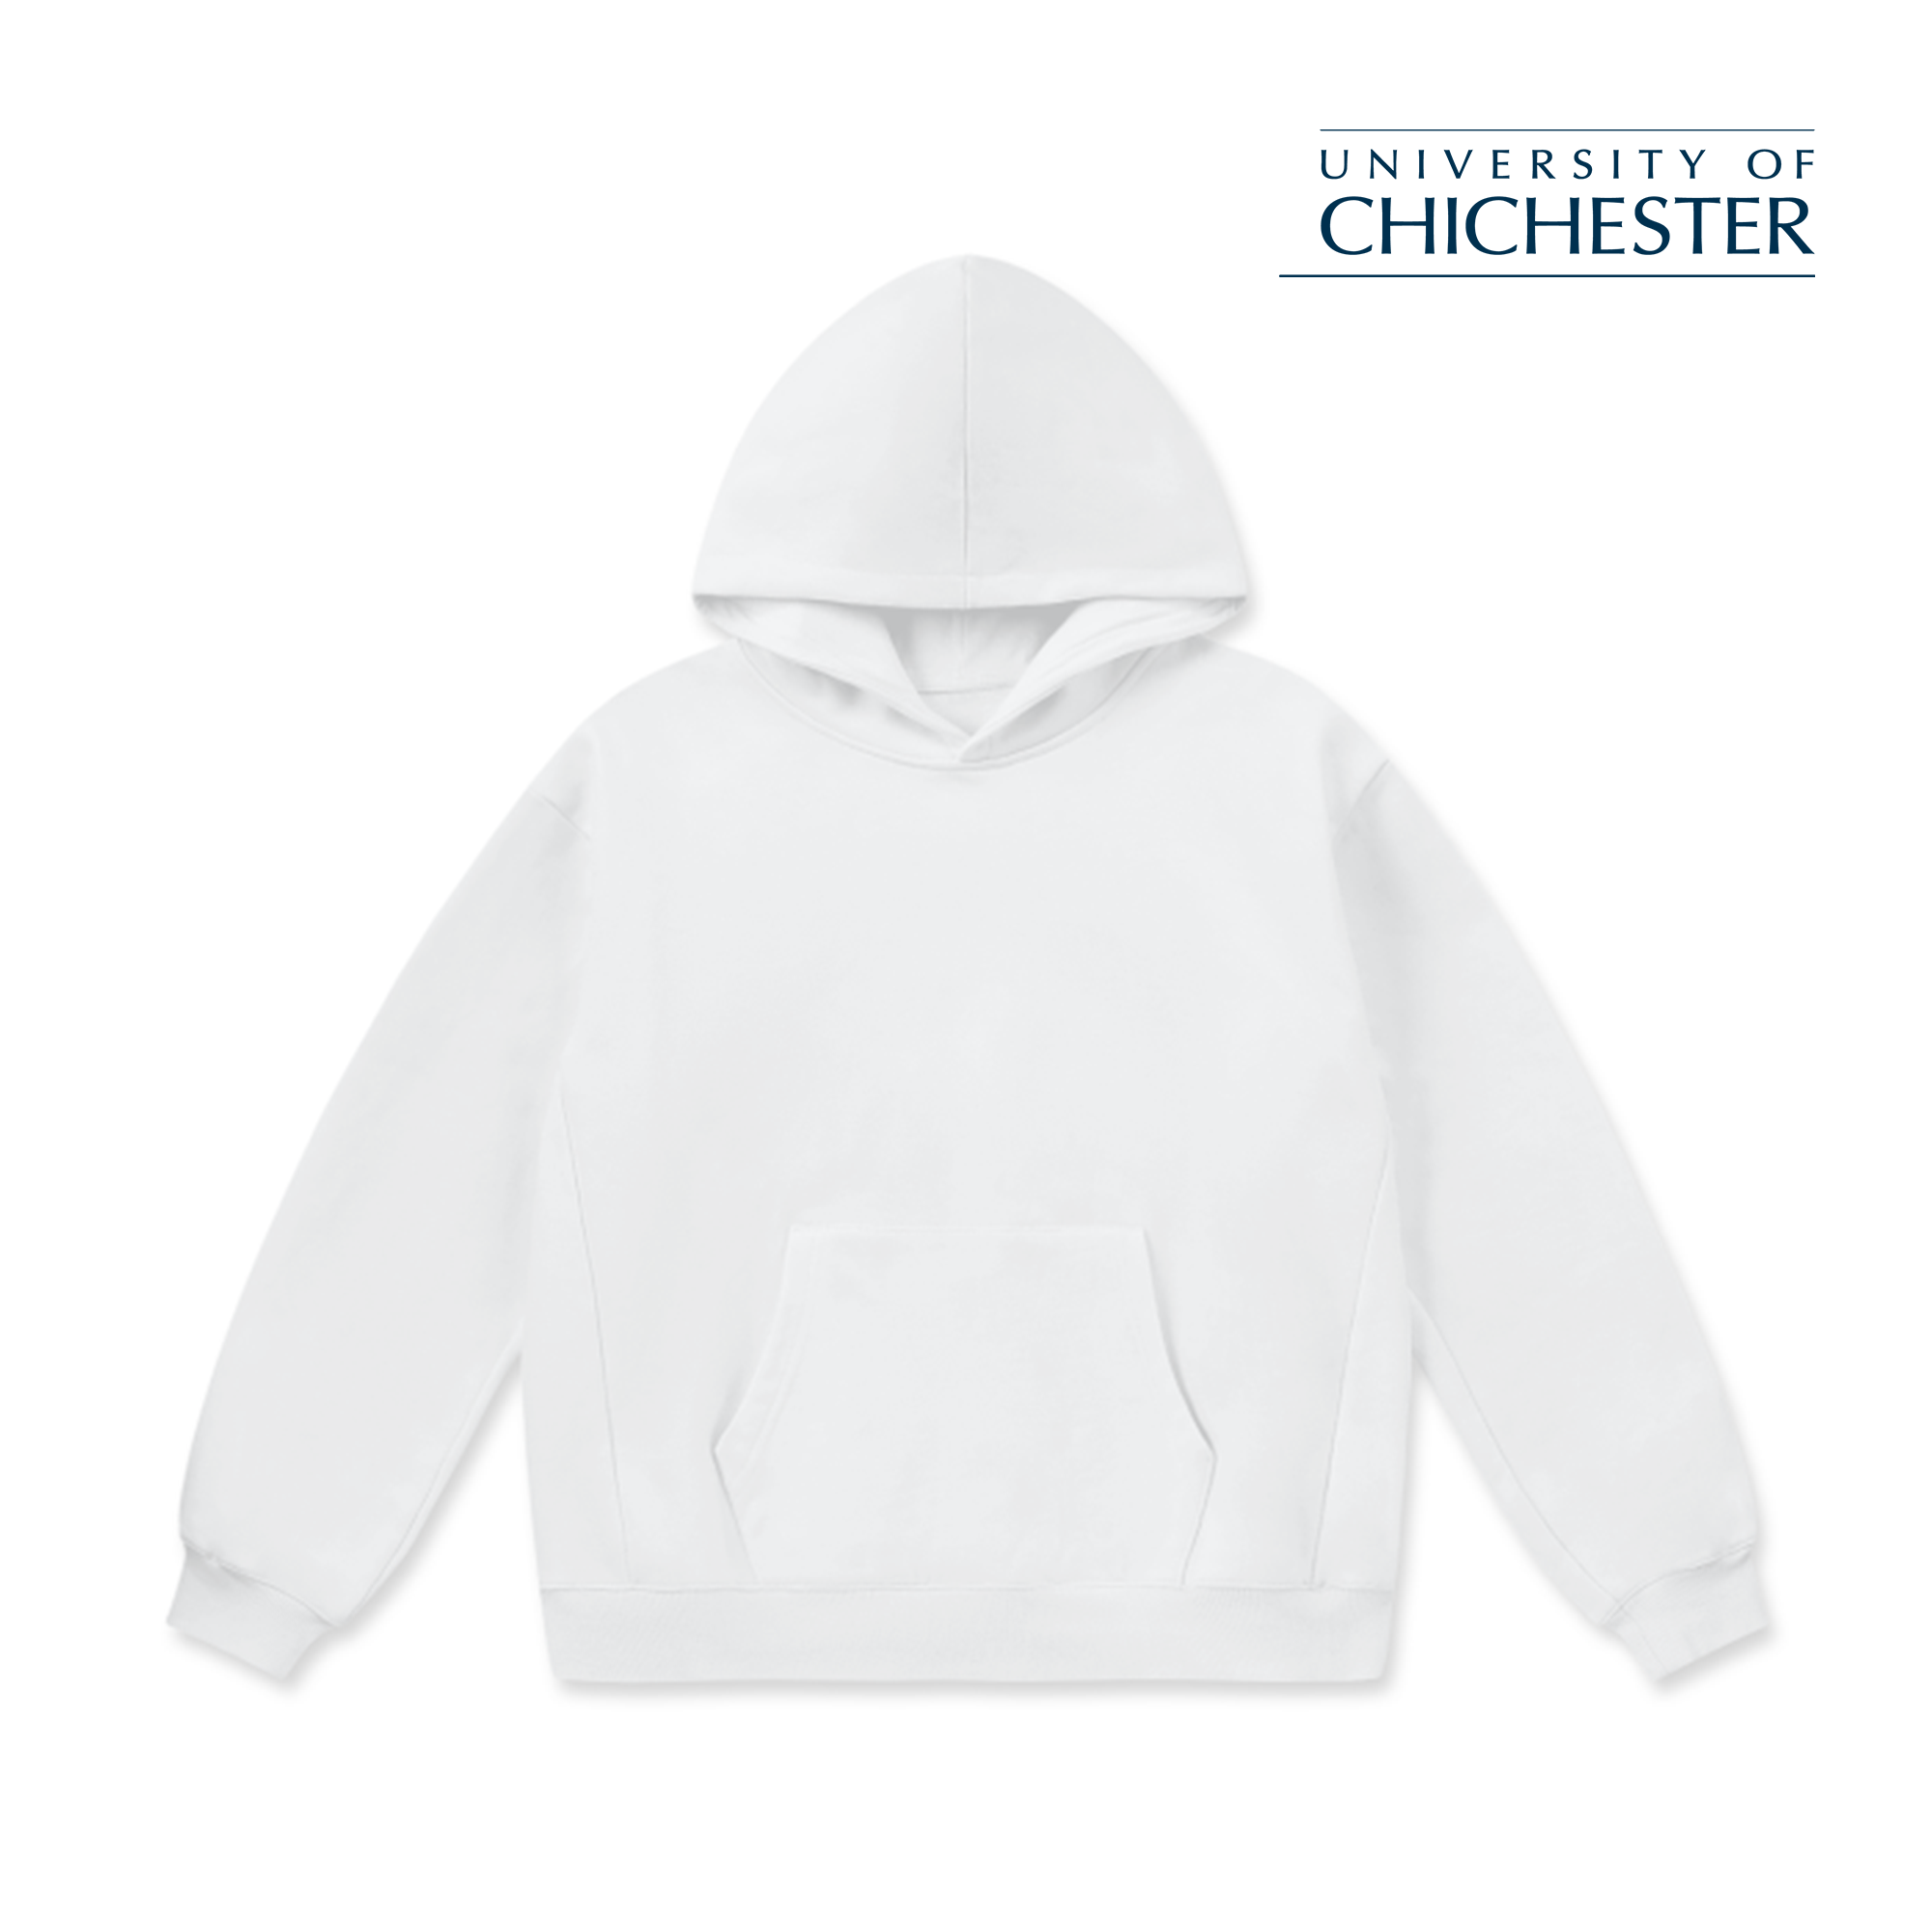 LCC Super Weighted Hoodie - University of Chichester (Modern)